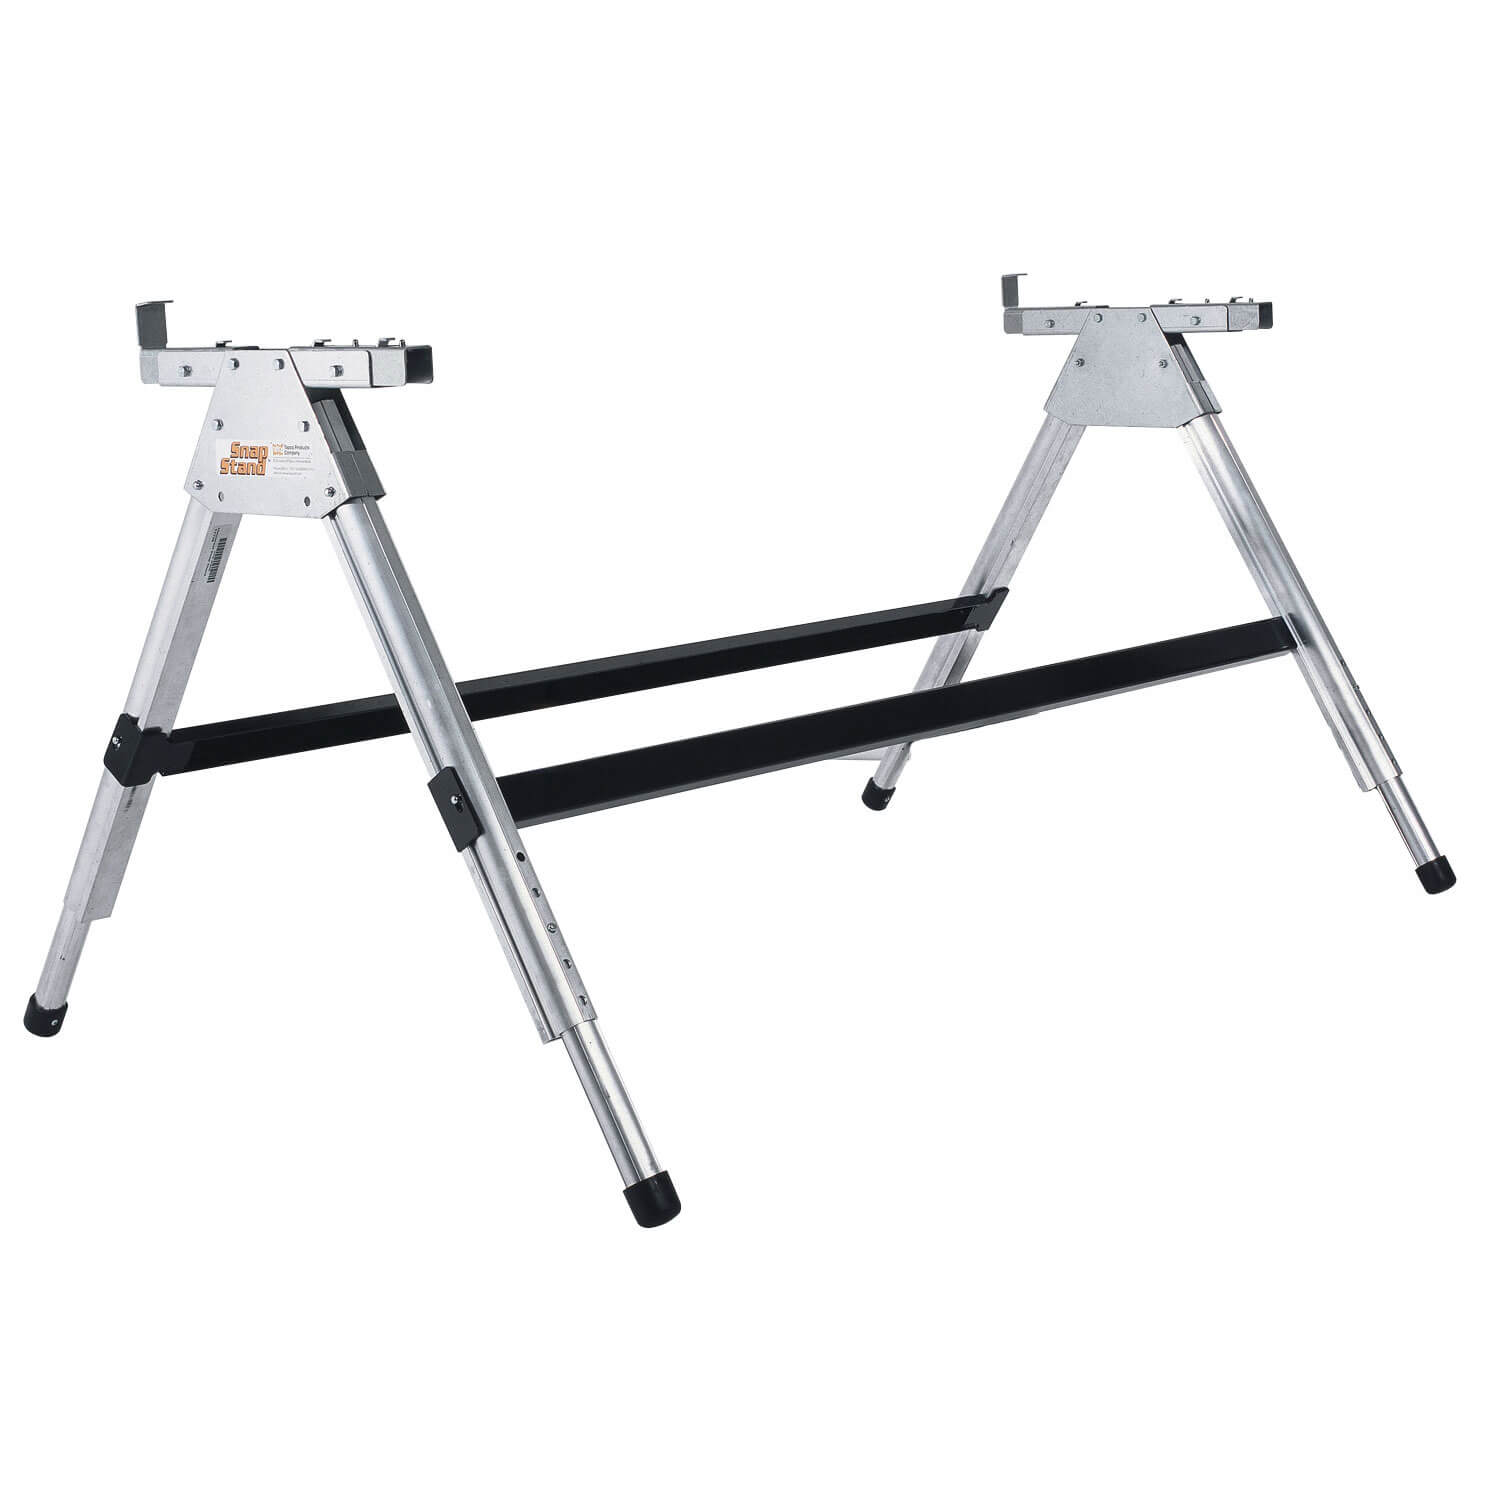 Tapco Snap Stand for 6' Pro Series Brakes